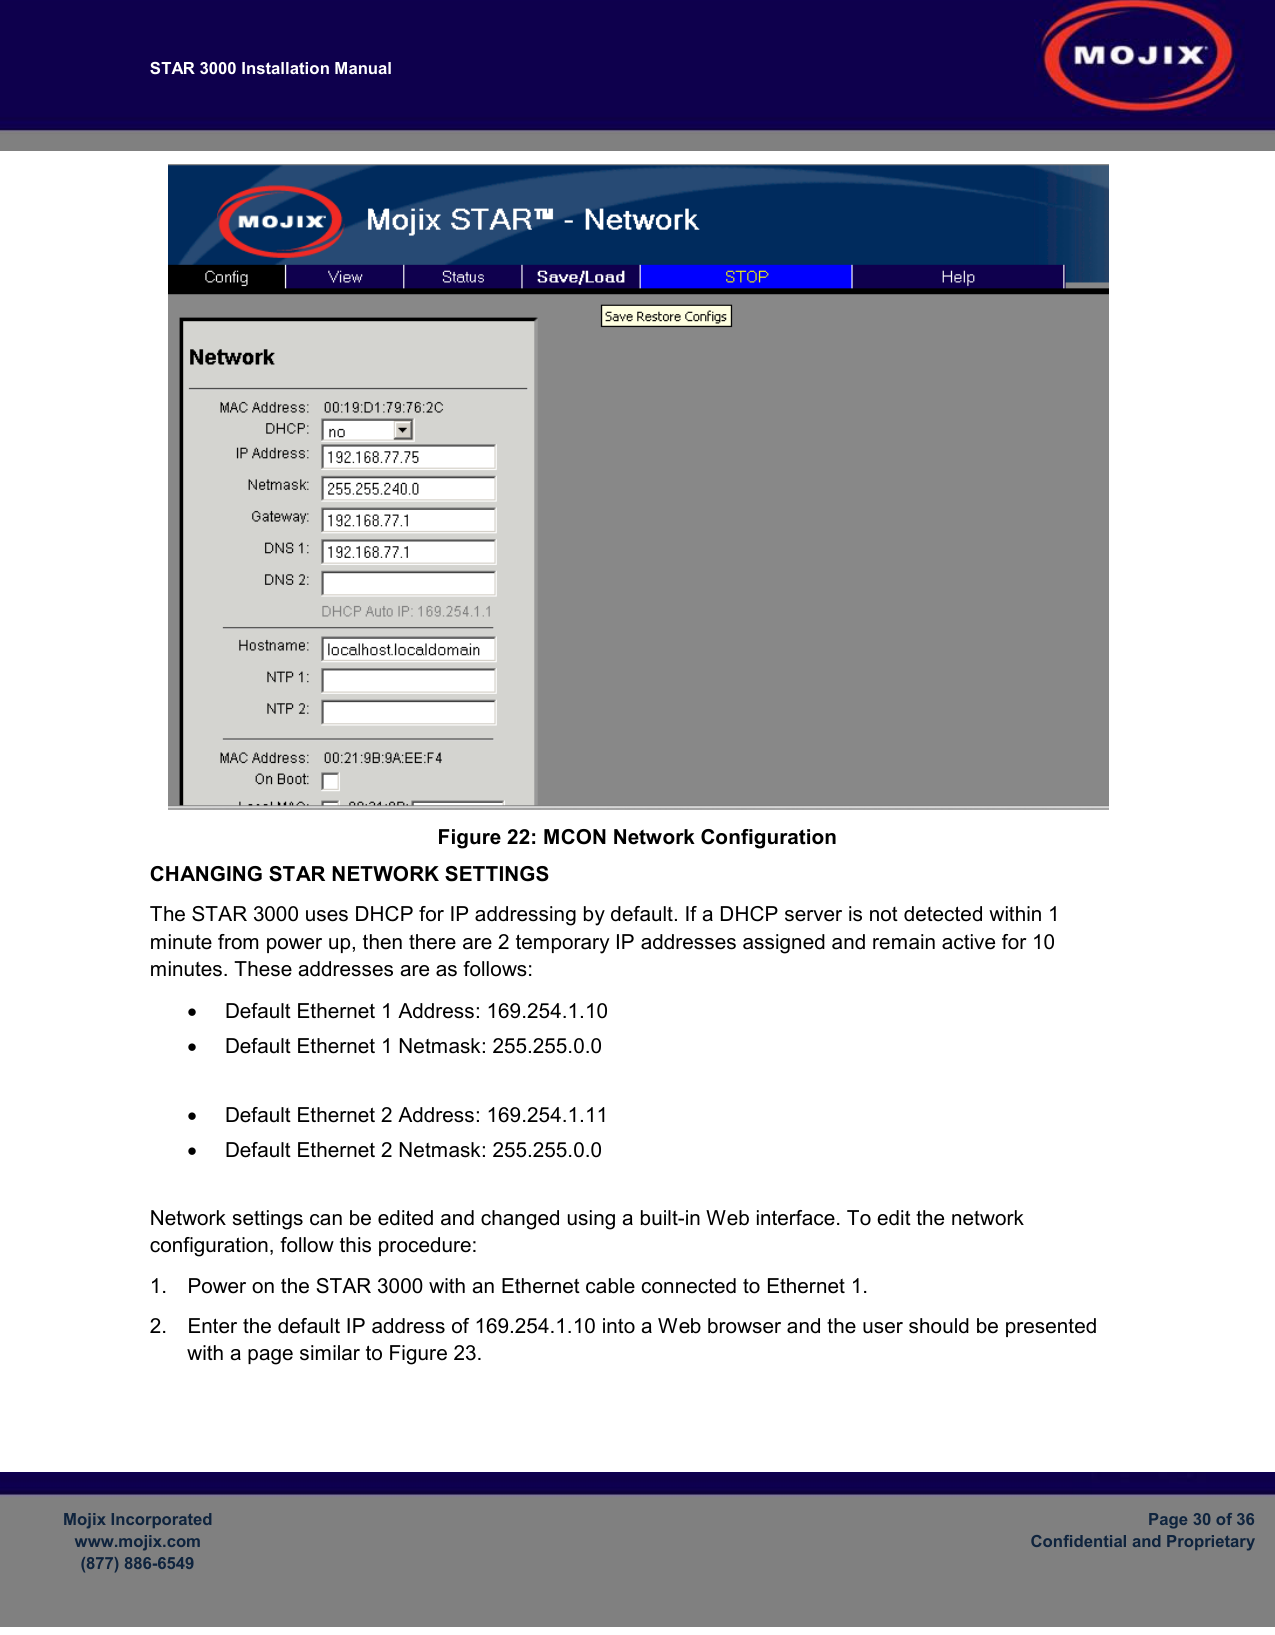 STAR 3000 Installation Manual         Mojix Incorporated www.mojix.com (877) 886-6549  Page 30 of 36 Confidential and Proprietary   Figure 22: MCON Network Configuration CHANGING STAR NETWORK SETTINGS The STAR 3000 uses DHCP for IP addressing by default. If a DHCP server is not detected within 1 minute from power up, then there are 2 temporary IP addresses assigned and remain active for 10 minutes. These addresses are as follows: •  Default Ethernet 1 Address: 169.254.1.10 •  Default Ethernet 1 Netmask: 255.255.0.0  •  Default Ethernet 2 Address: 169.254.1.11 •  Default Ethernet 2 Netmask: 255.255.0.0  Network settings can be edited and changed using a built-in Web interface. To edit the network configuration, follow this procedure: 1.  Power on the STAR 3000 with an Ethernet cable connected to Ethernet 1.  2.  Enter the default IP address of 169.254.1.10 into a Web browser and the user should be presented with a page similar to Figure 23.  